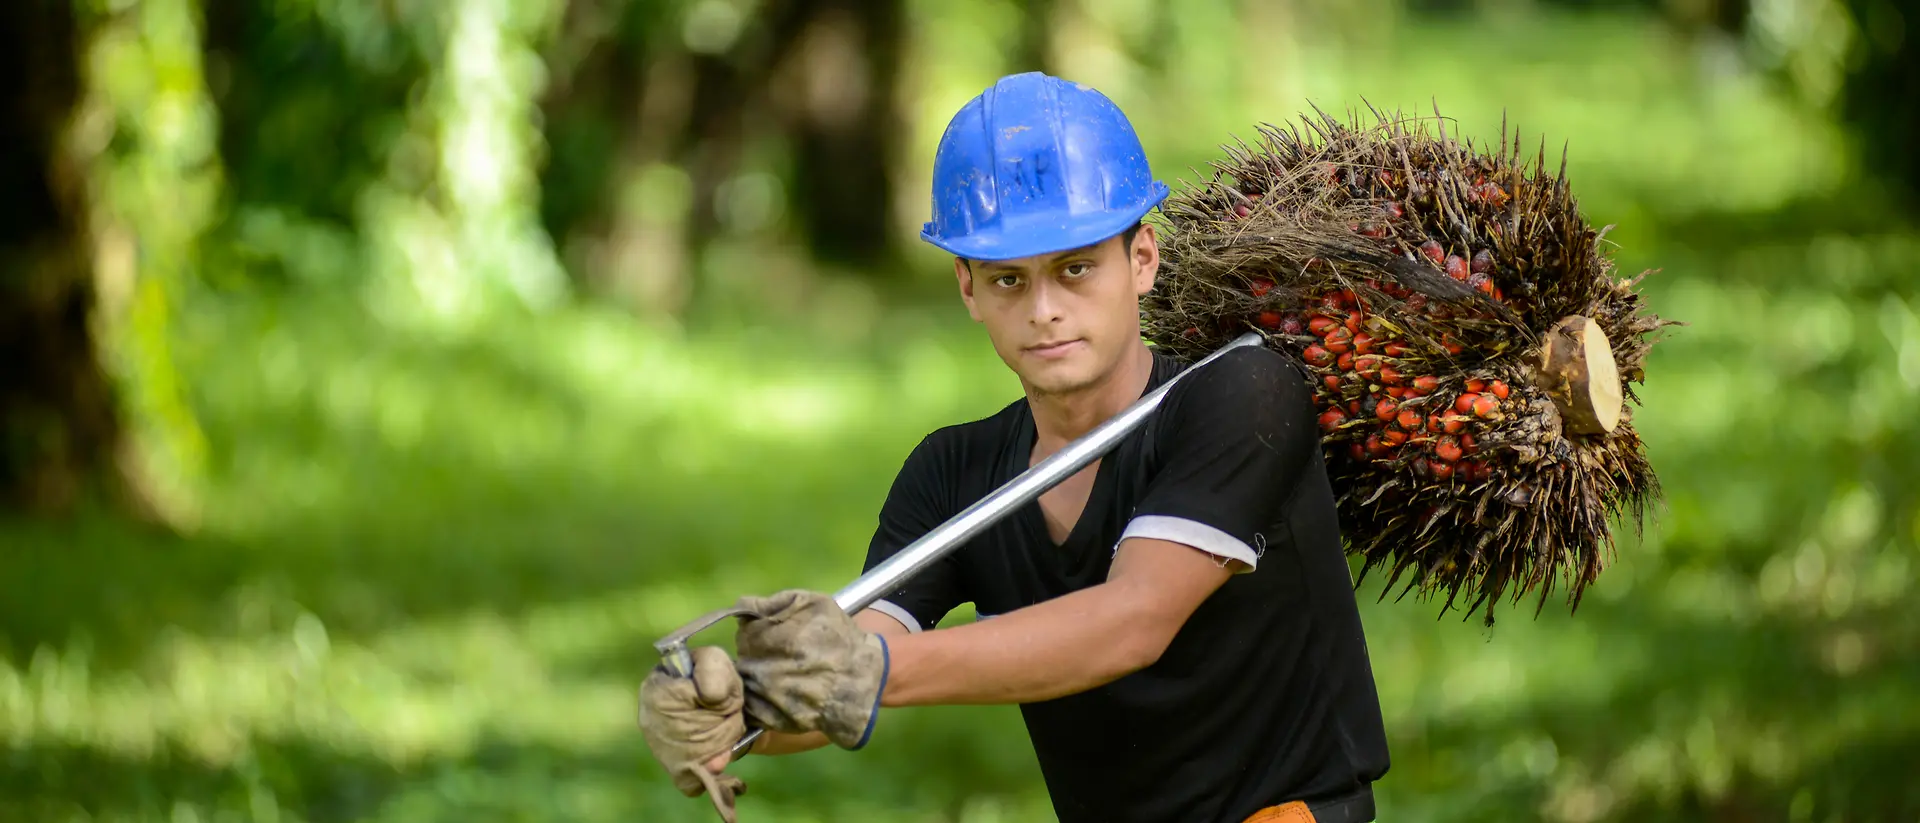 Worker wearing a blue helmet, carrying palm fruits on a palm plantation